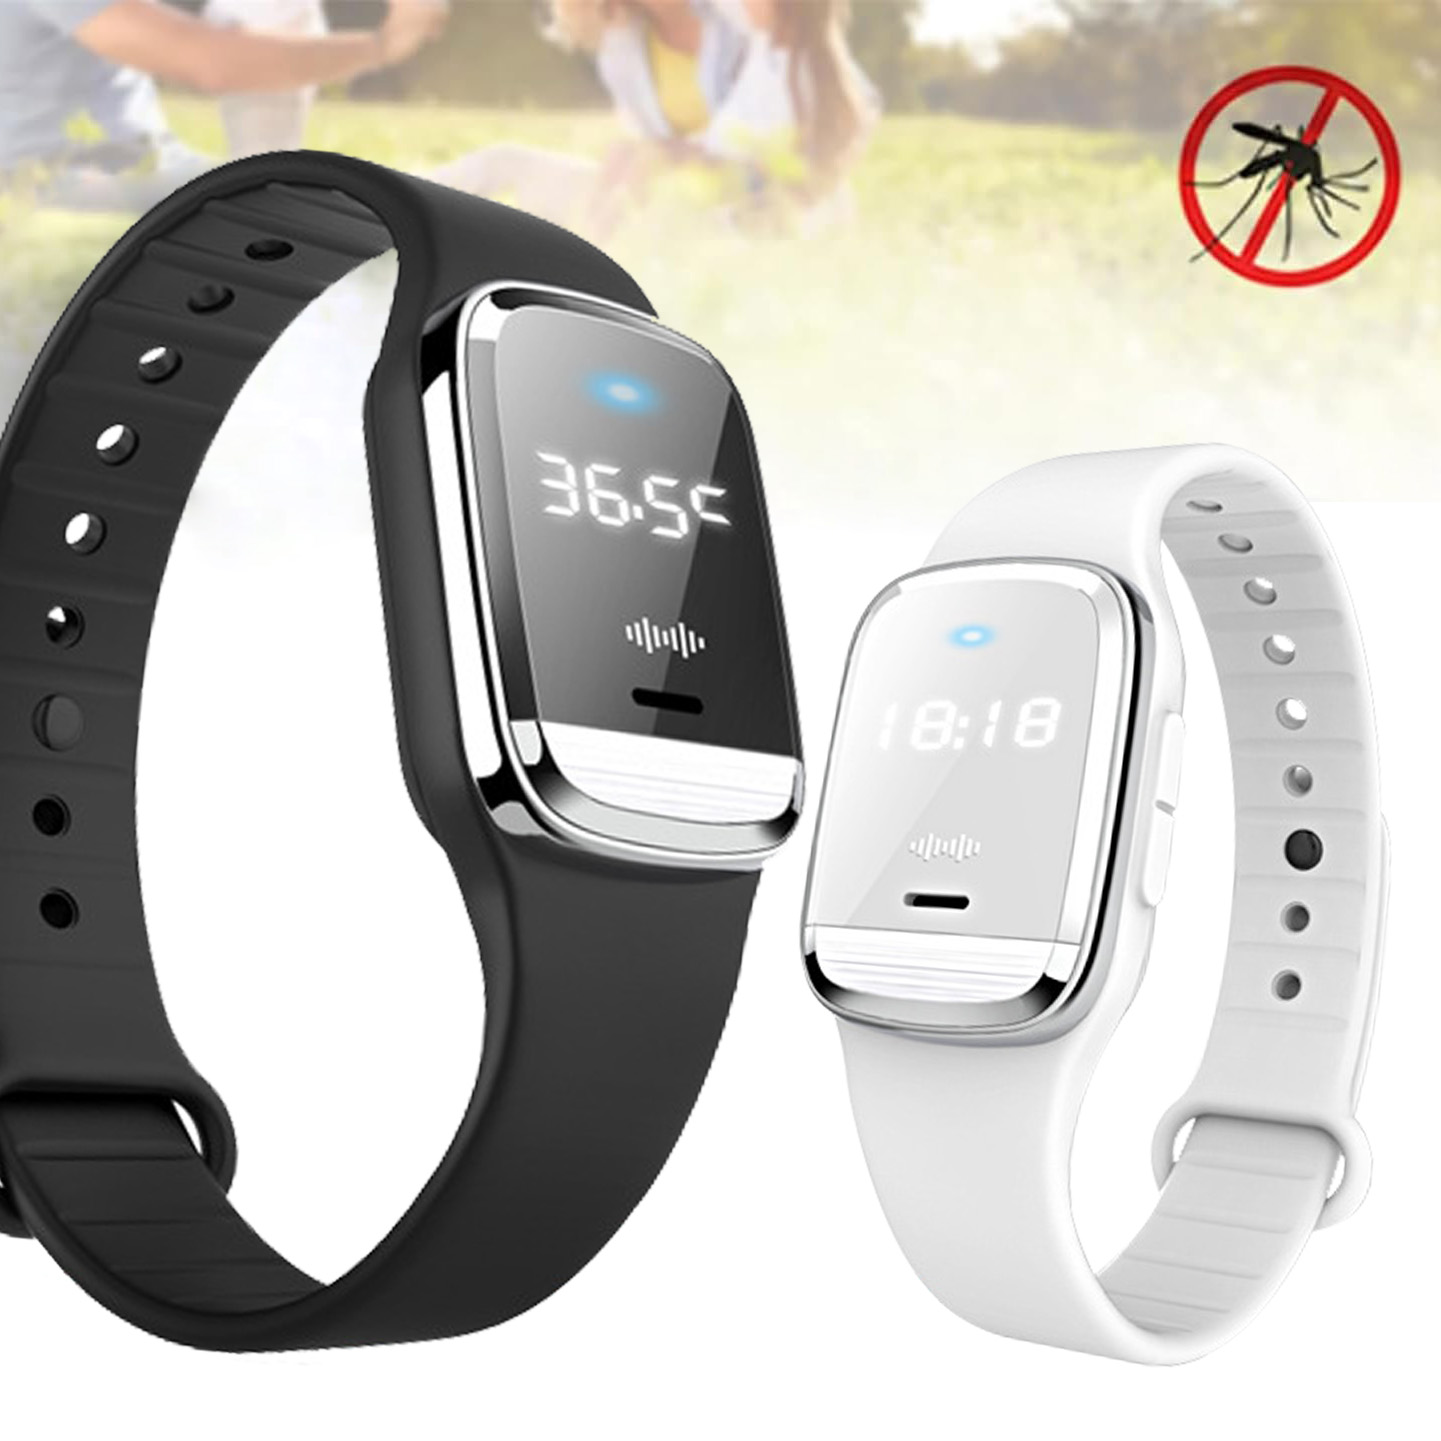 Ultrasonic Mosquito Repellent Bracelet Watch With Time And Temperature Display